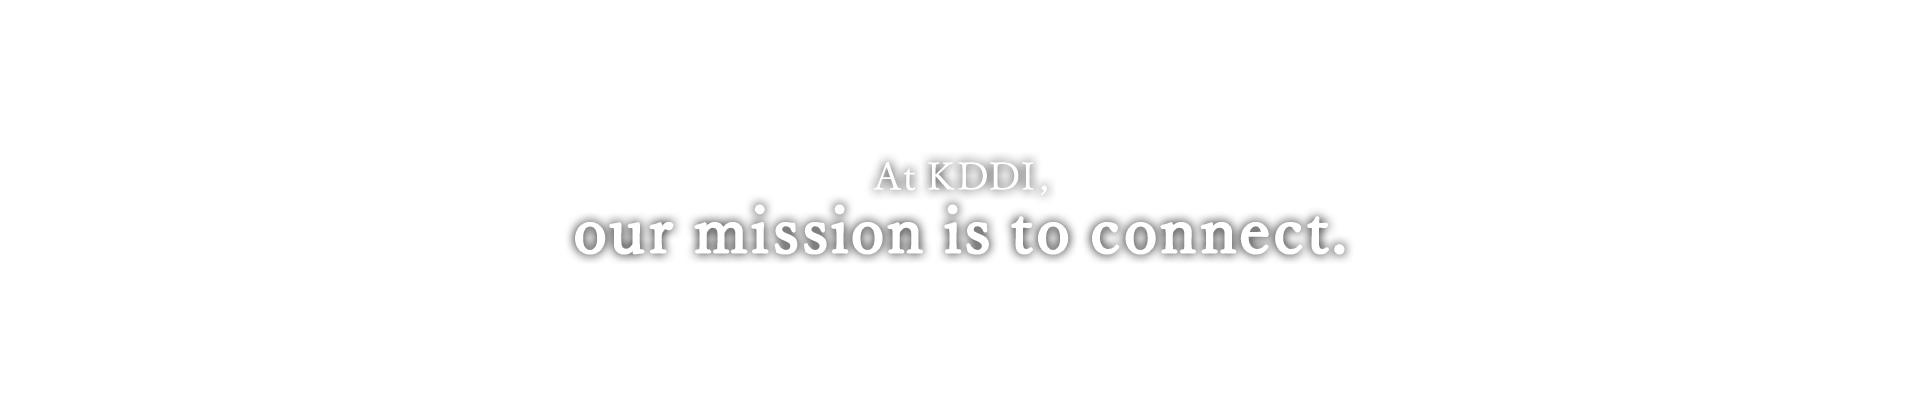 At KDDI, our mission is to connect.